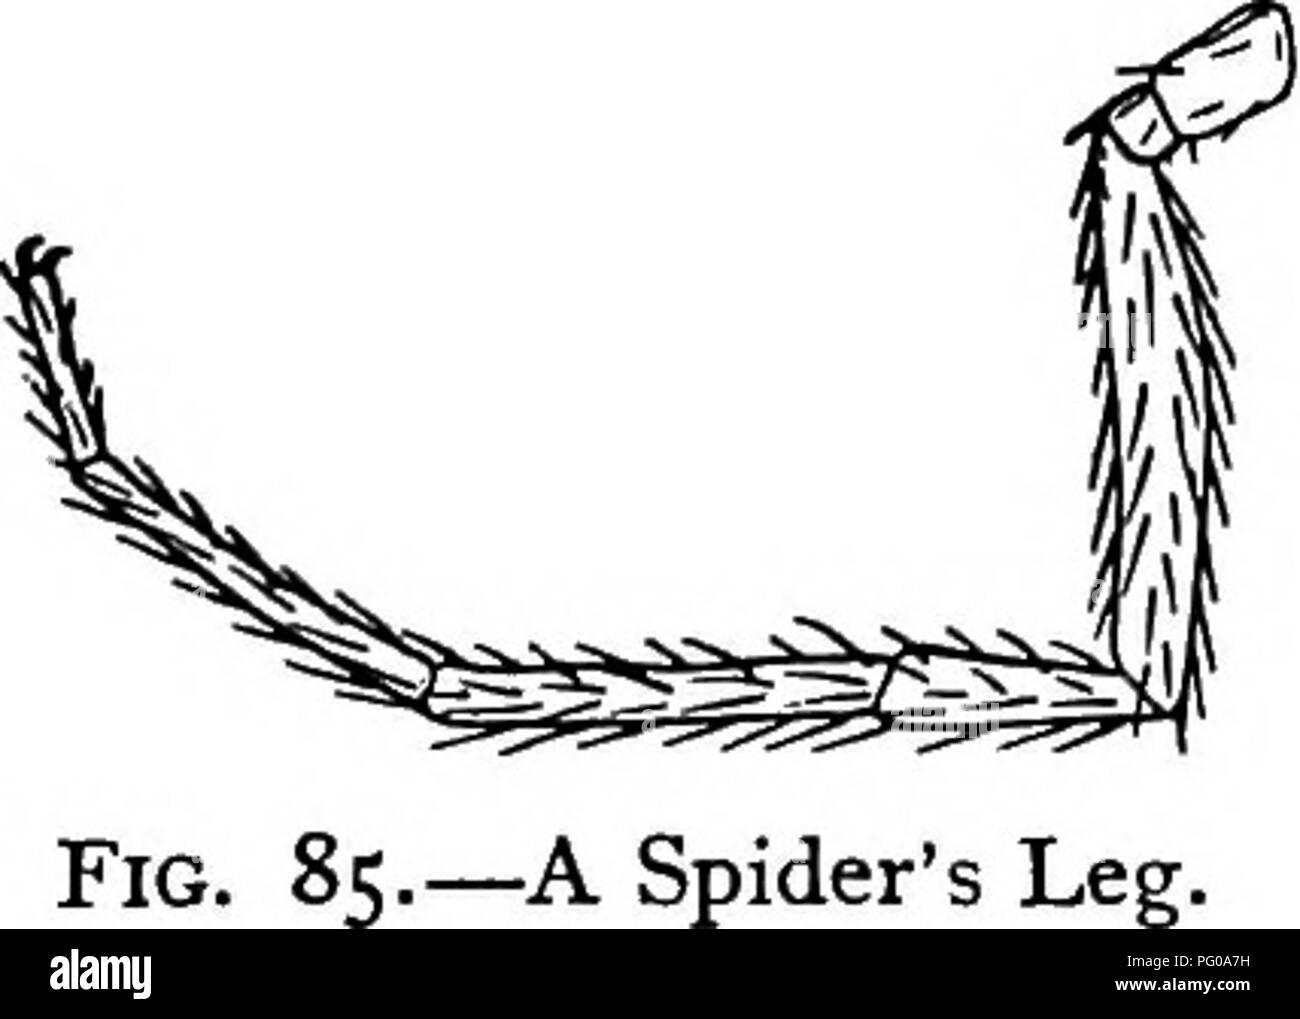 . Animal activities; a first book in zoo?logy. Zoology; Animal behavior. 94 y4NIMAL ACTIVITIES. Under the abdomen near the cephalothorax find two openings to the air-sacs or rudimentary lungs. Summary of Drawings, {a) A spider seen from above X 3- (3) A front view of the mandibles X 5- (&lt;:) A view of the top of the head showing the ocelli. {d) A hind foot much enlarged. The Spider's Activities. We have already con- sidered the activities of the grasshopper, classifying these under six heads. We have spoken of these six kinds of activities as the six functions of living things. In the spider Stock Photo